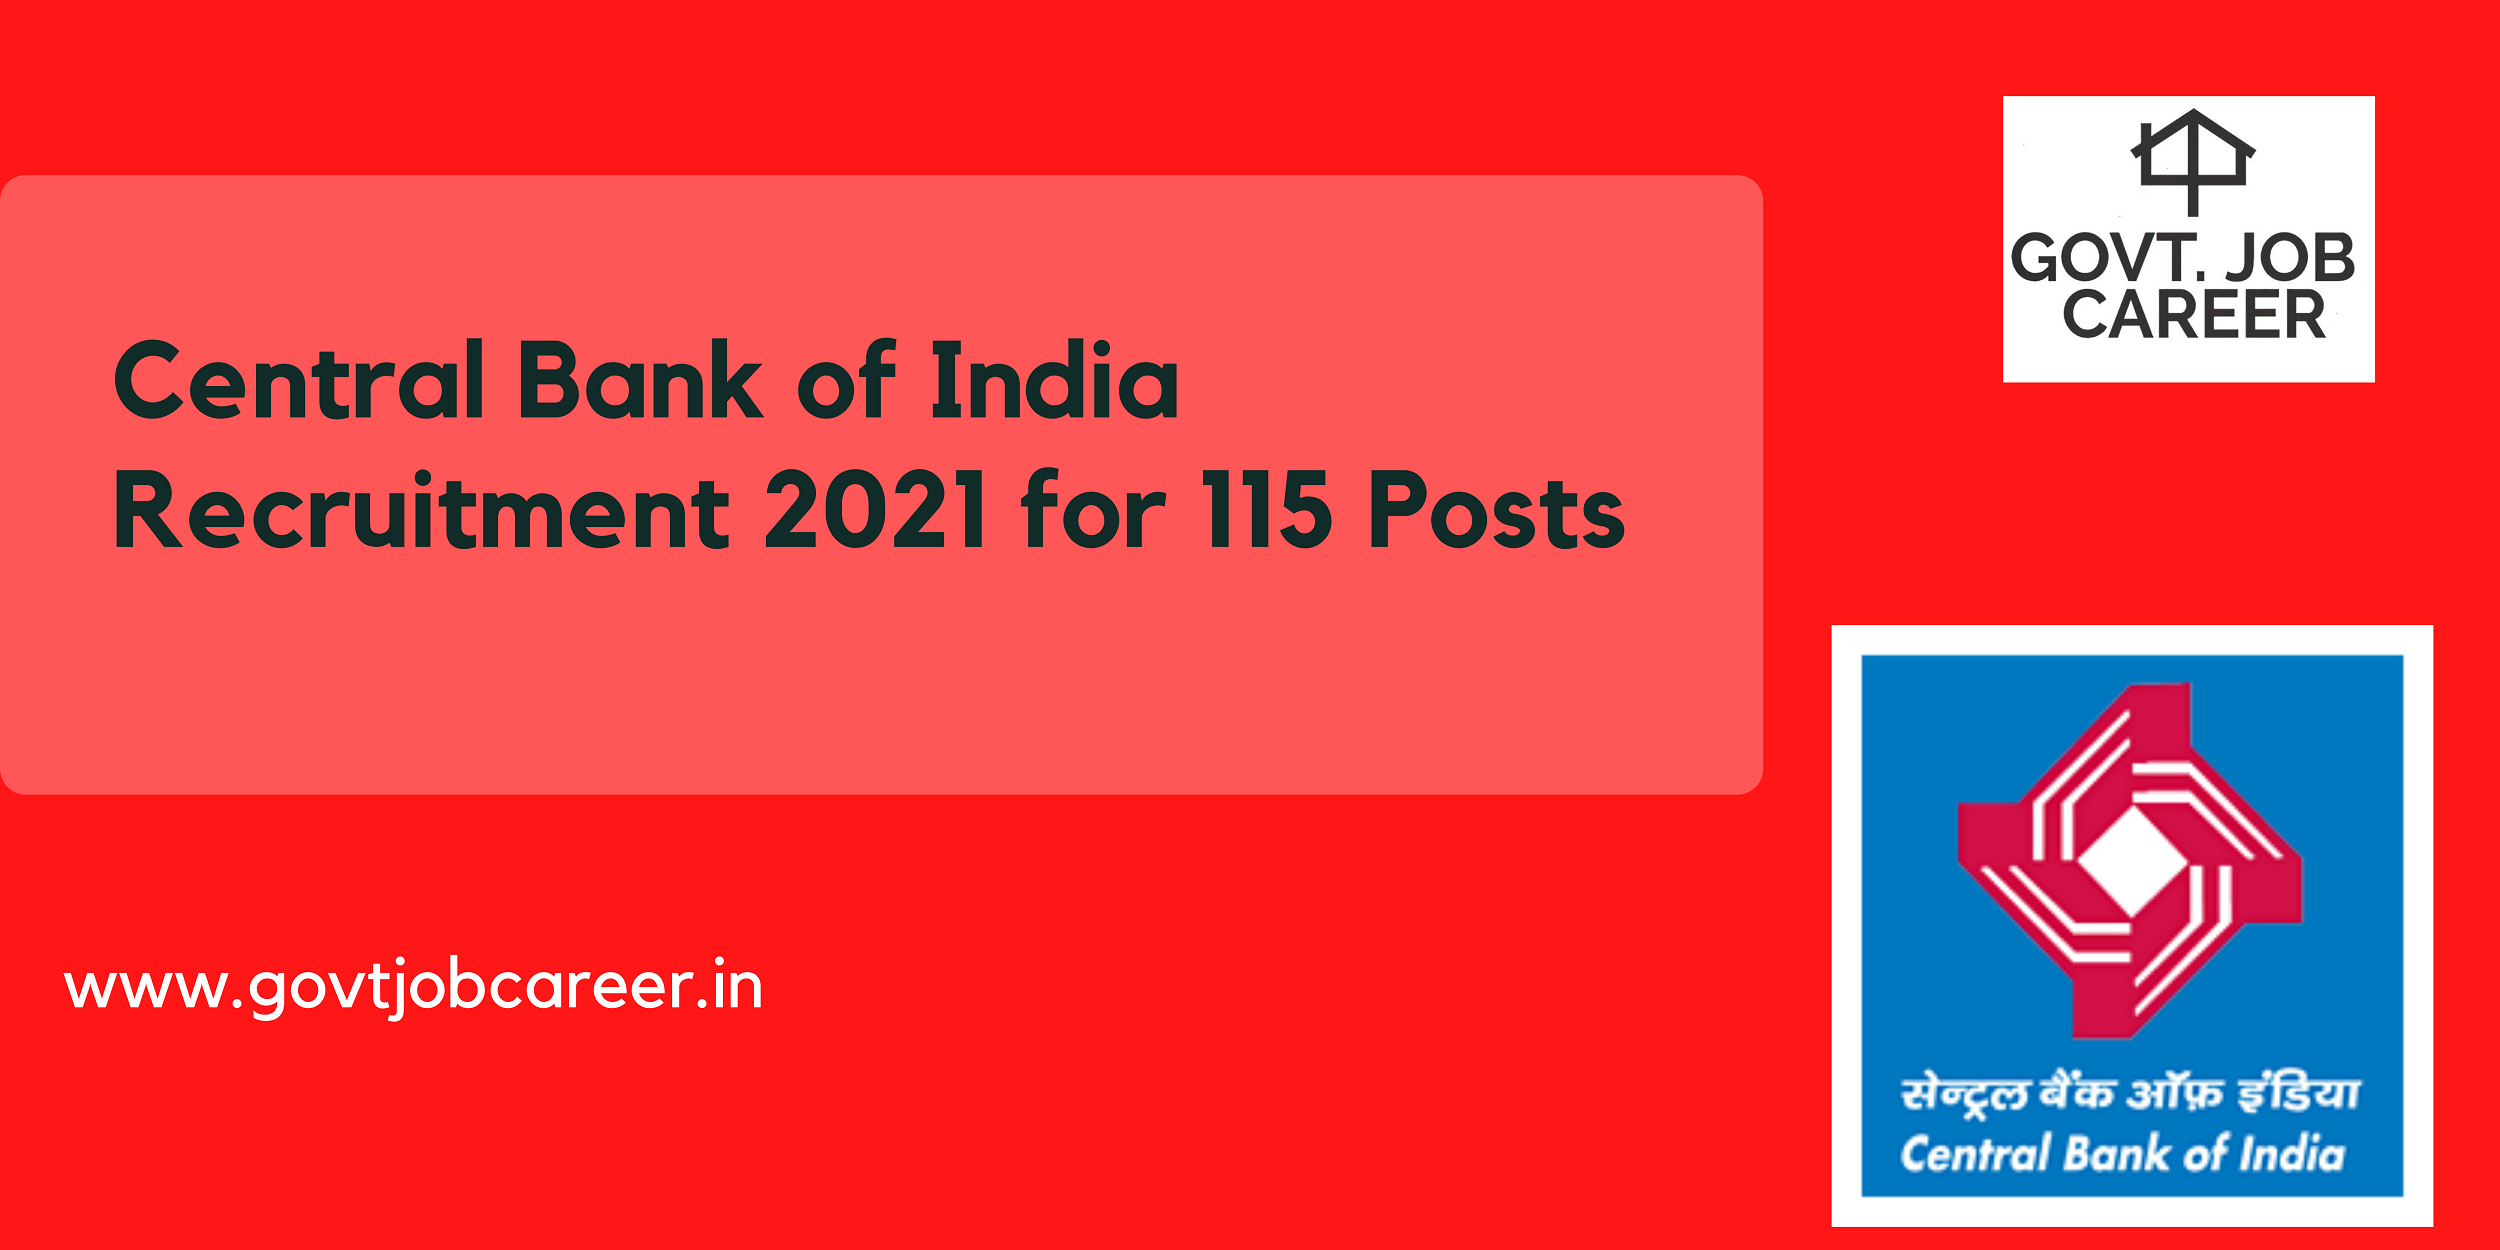 Central Bank of India Recruitment 2021 for 115 Posts